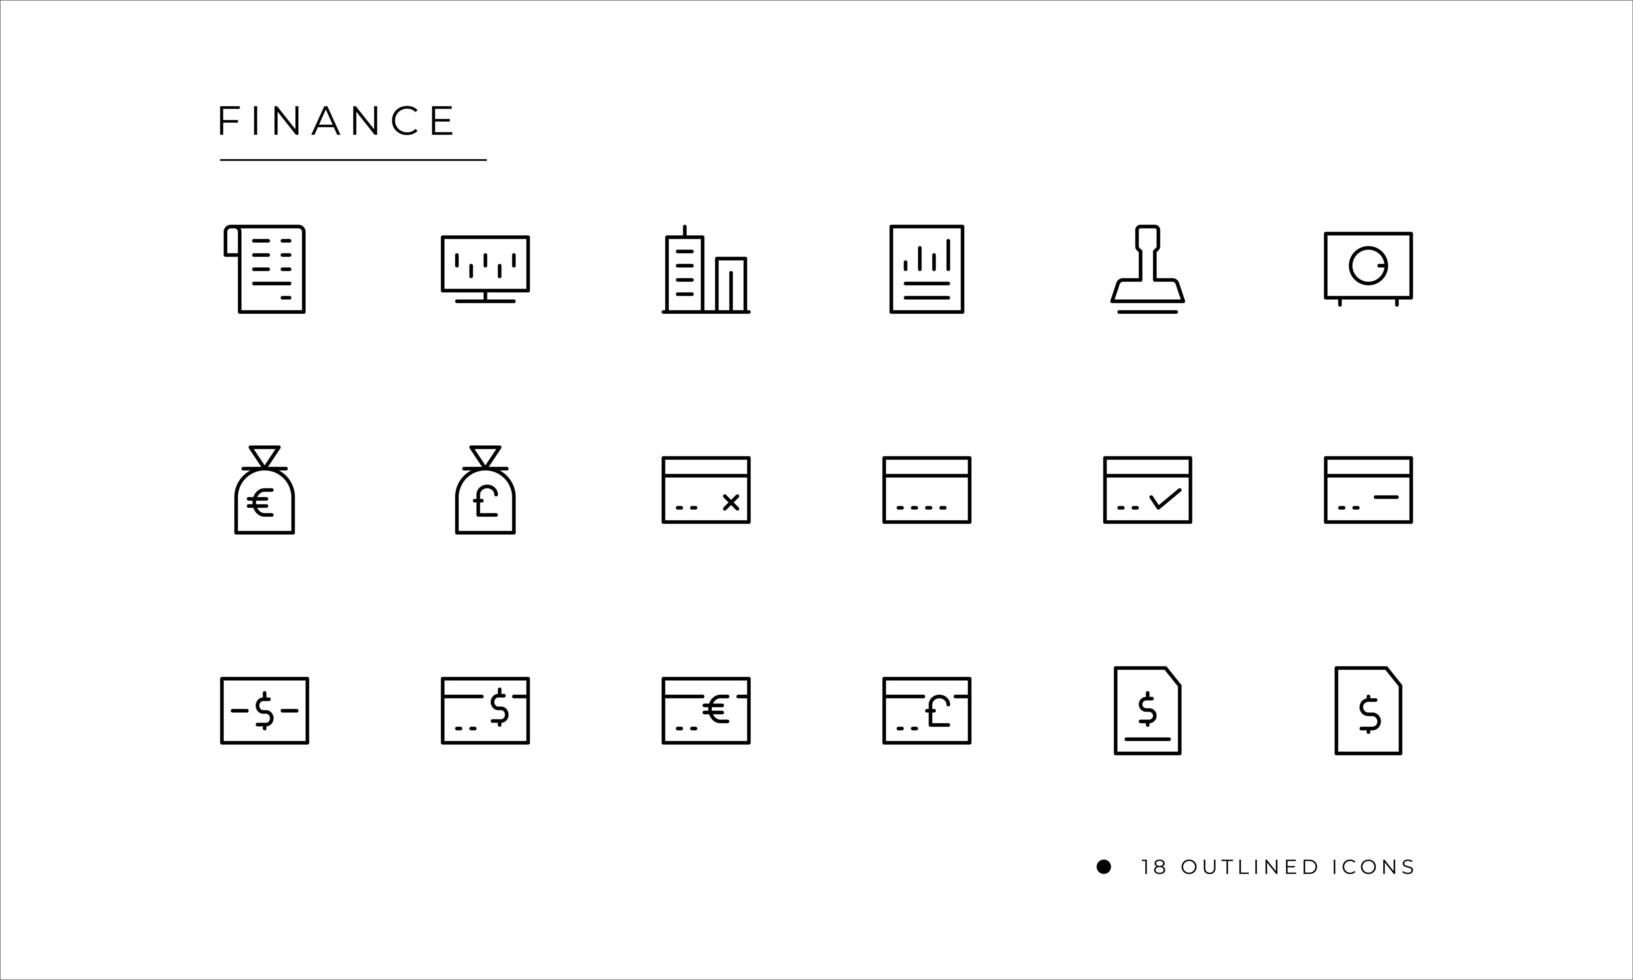 Finance icon set with outlined style vector